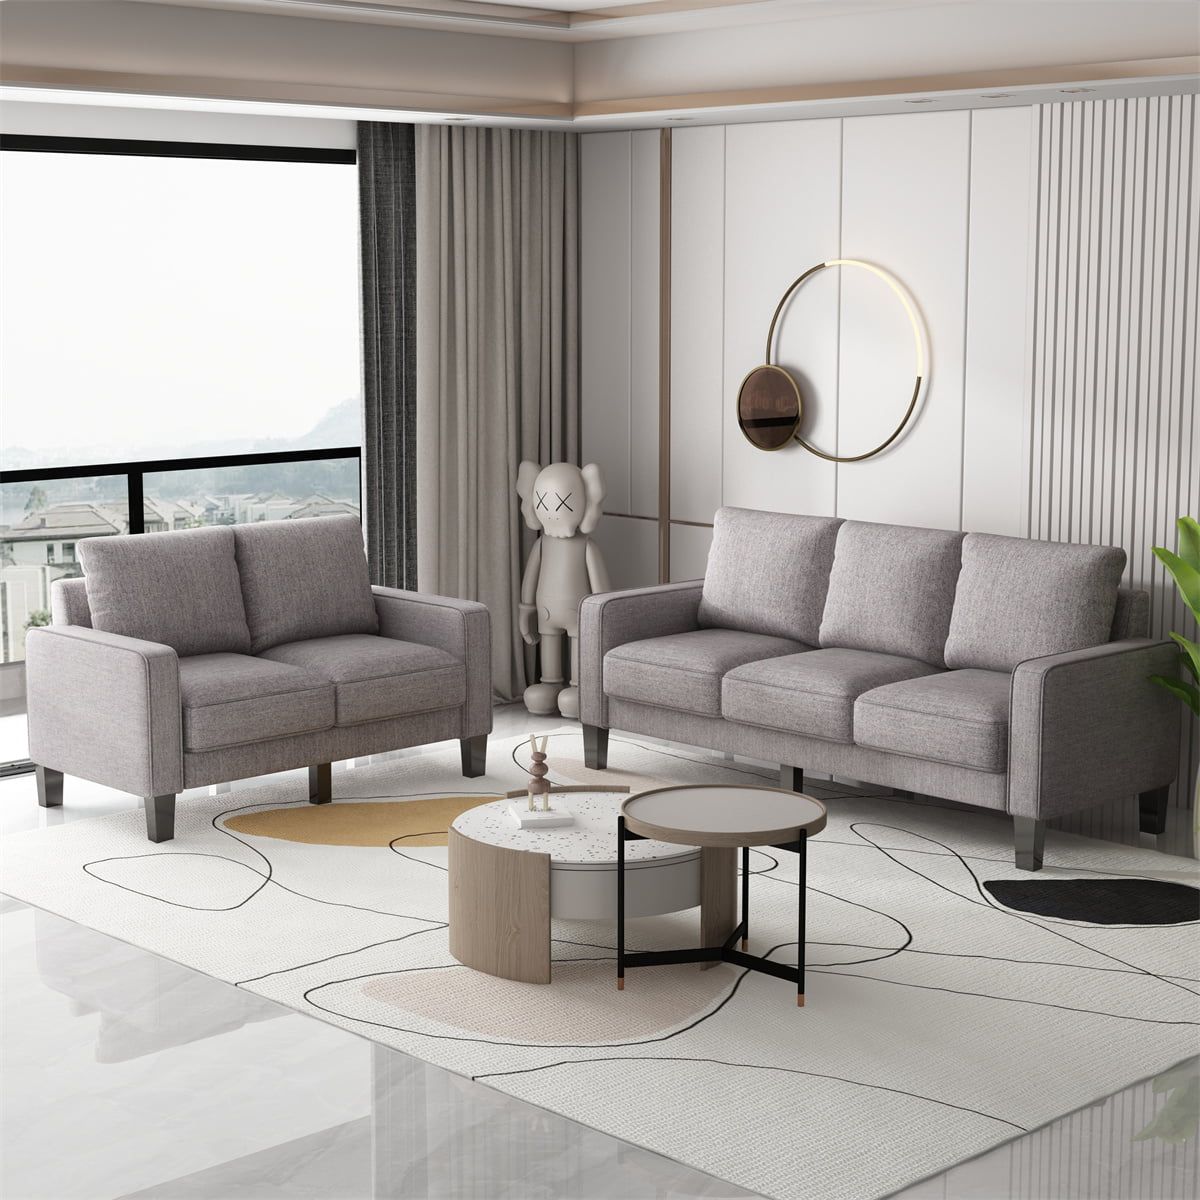 2 Pieces Living Room Sofa Set,Modern Linen Fabric Upholstered Couch  Furniture Sets Including 3 Seater Sofa Couch And Loveseat Sofa With Under  Seat Storage For Living Room Apartment Office,Light Grey – Walmart Inside Modern Linen Fabric Sofa Sets (Photo 11 of 15)